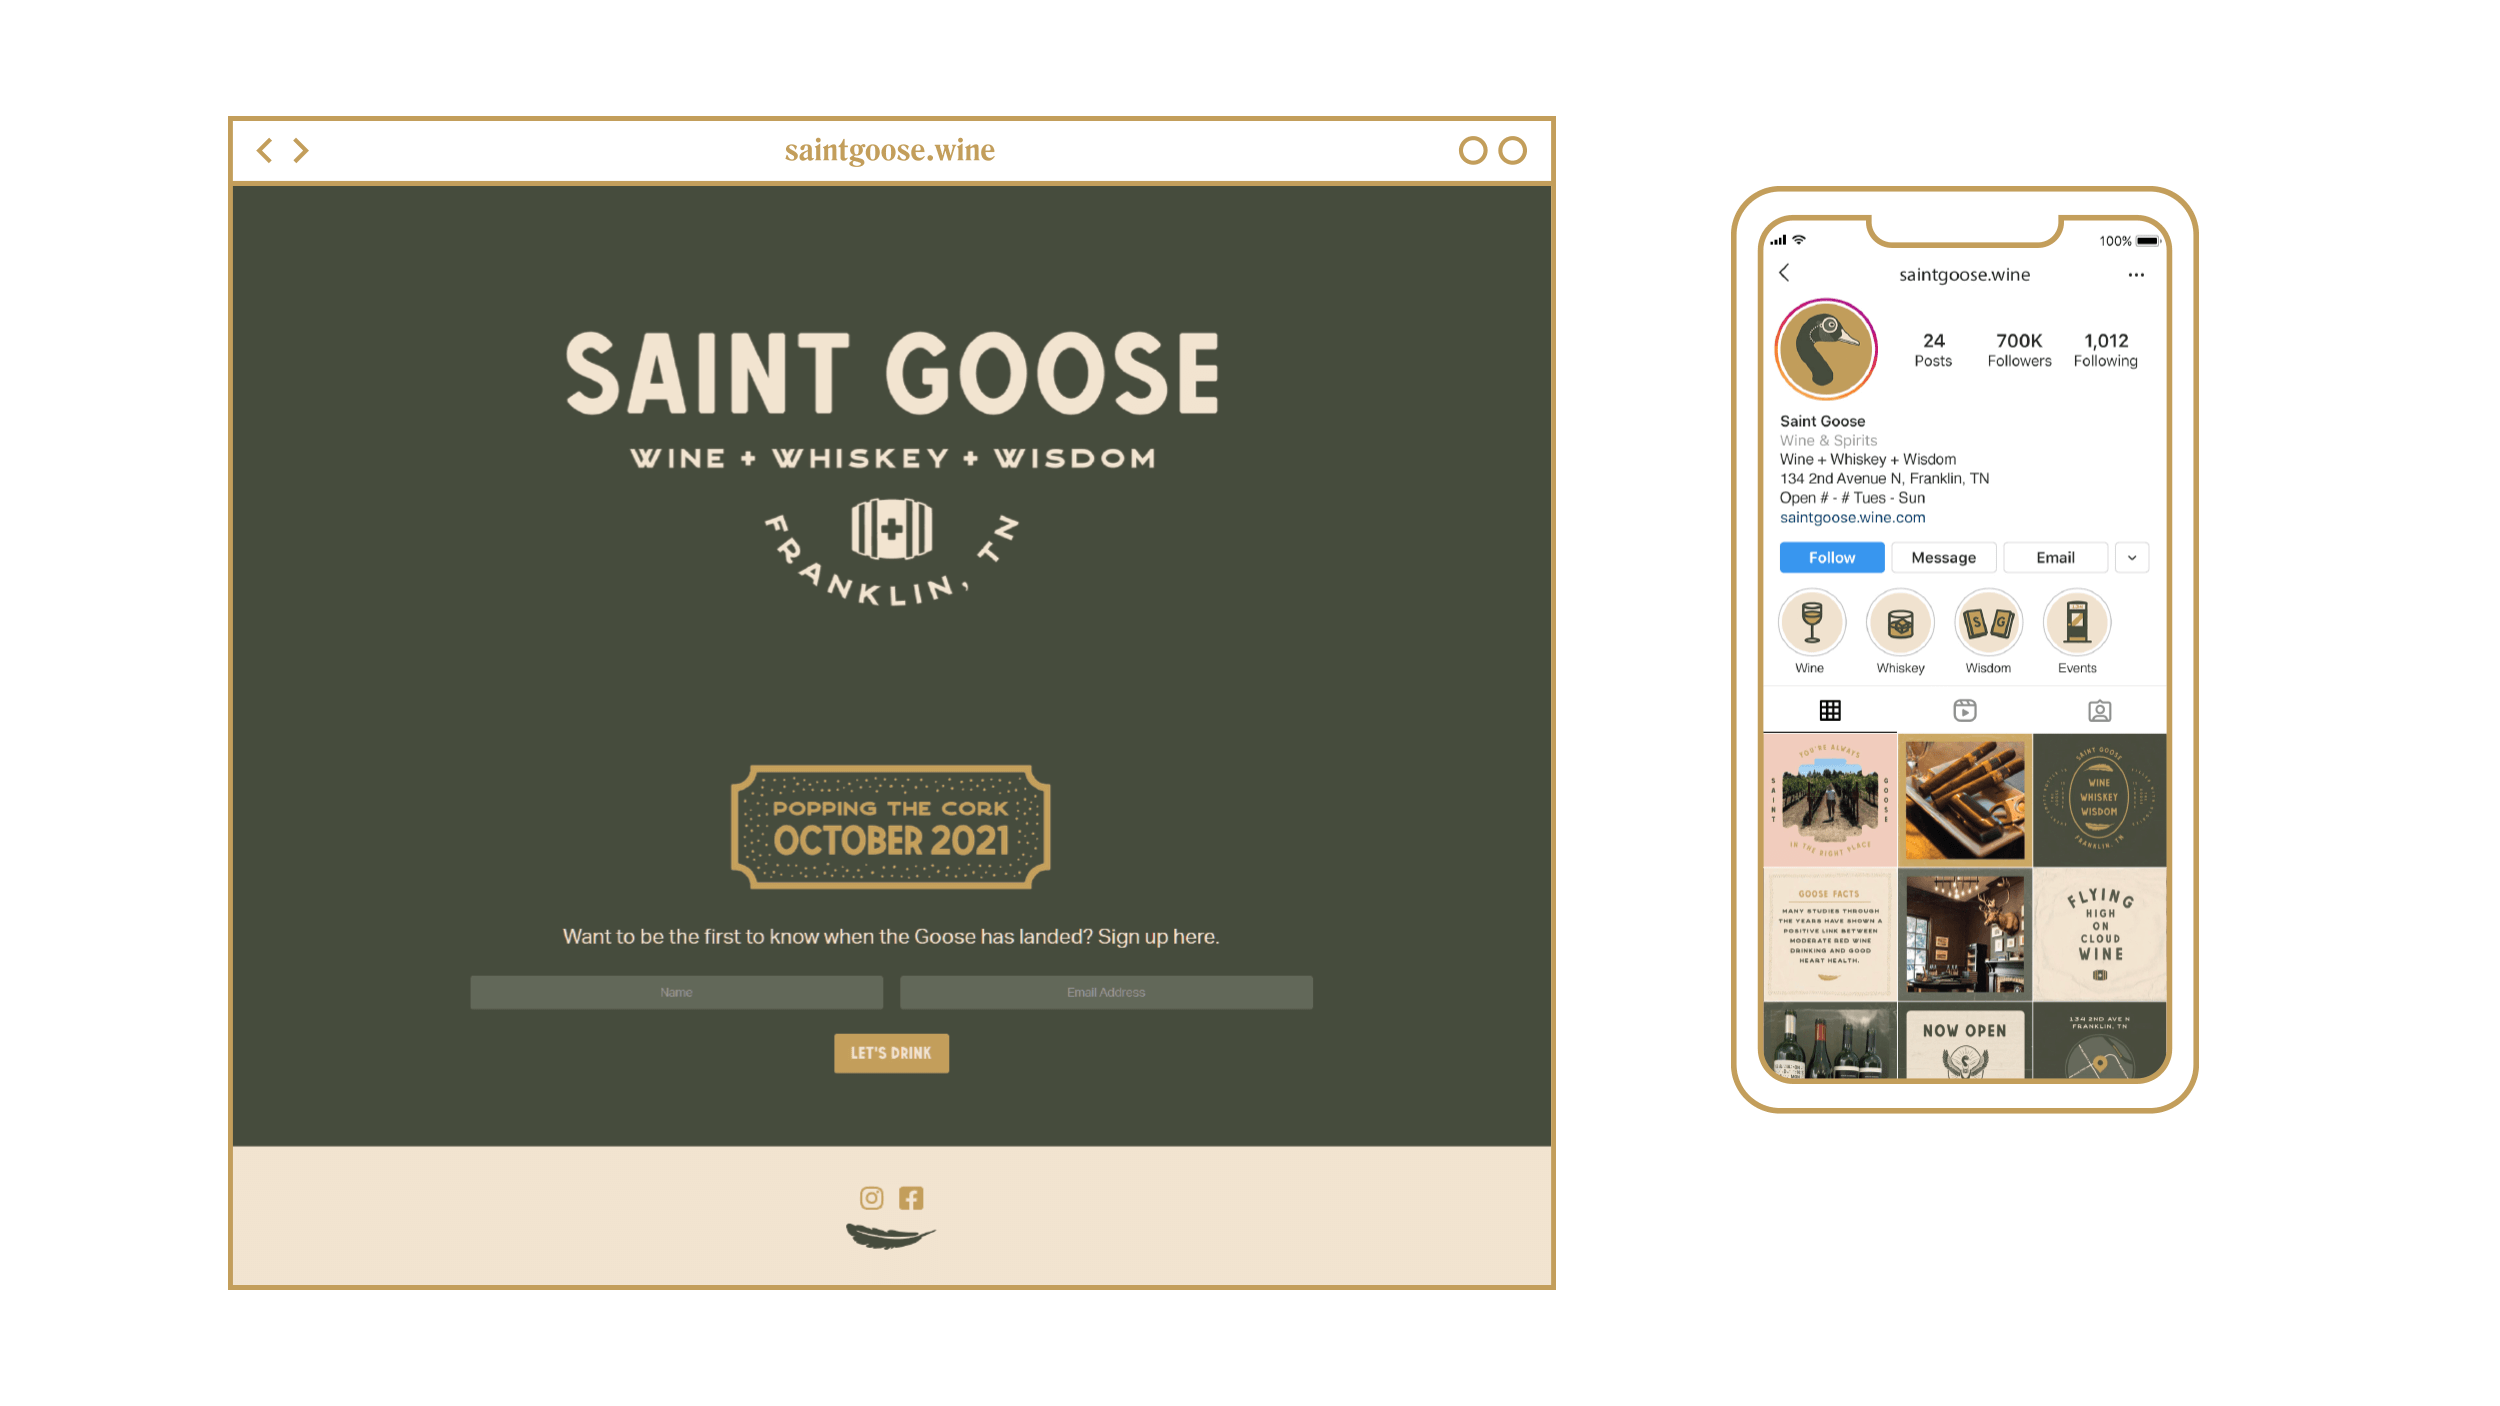 Saint Goose mockups of landing page on left and social grid on right